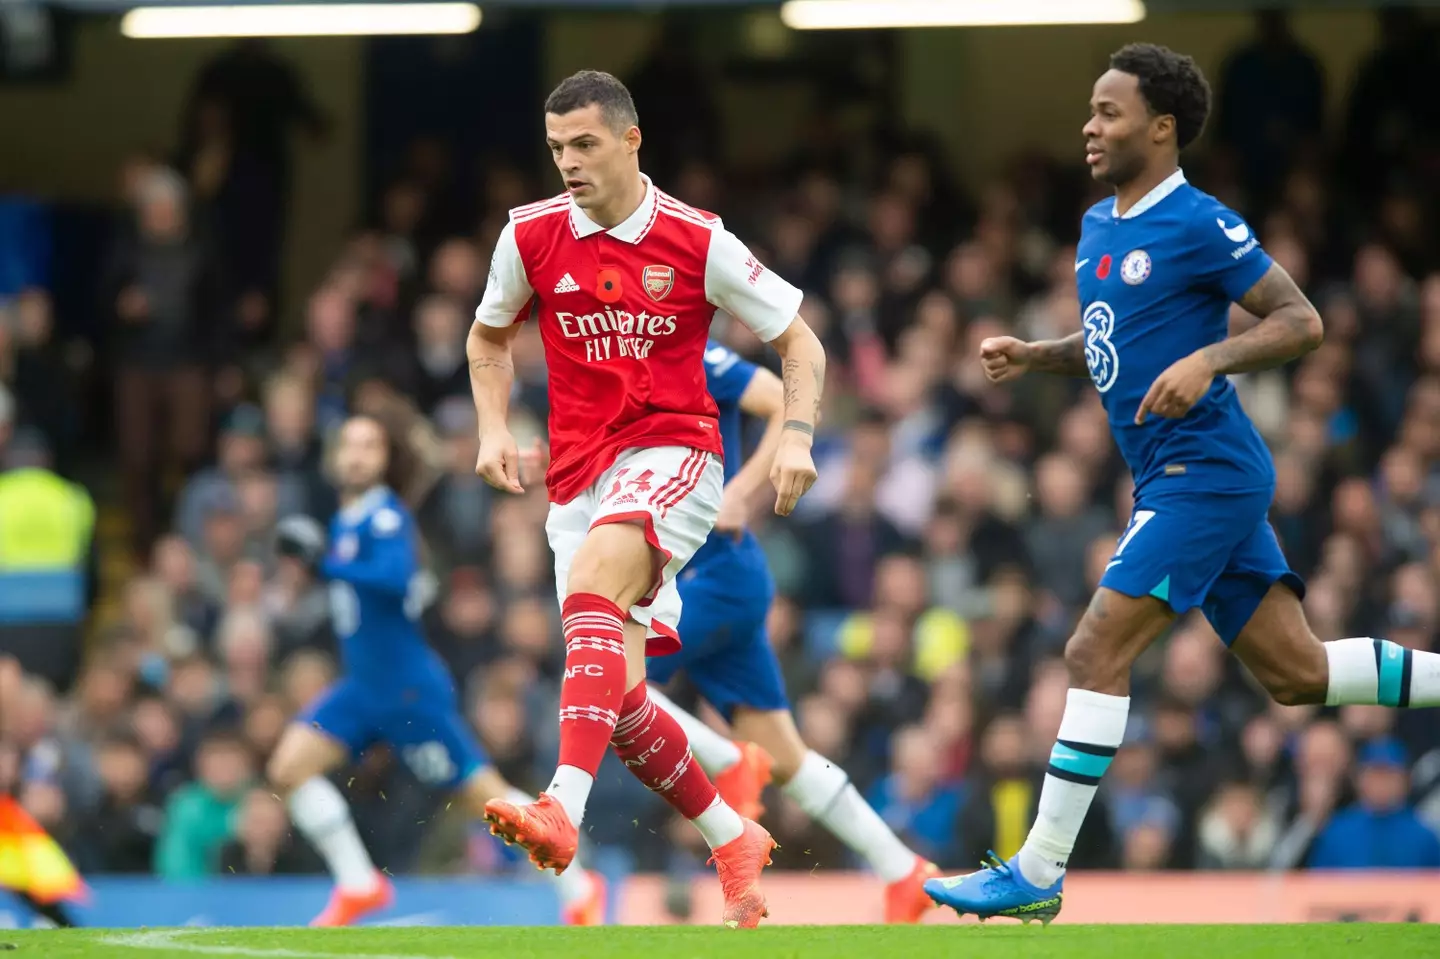 Xhaka during the game against Chelsea. (Image